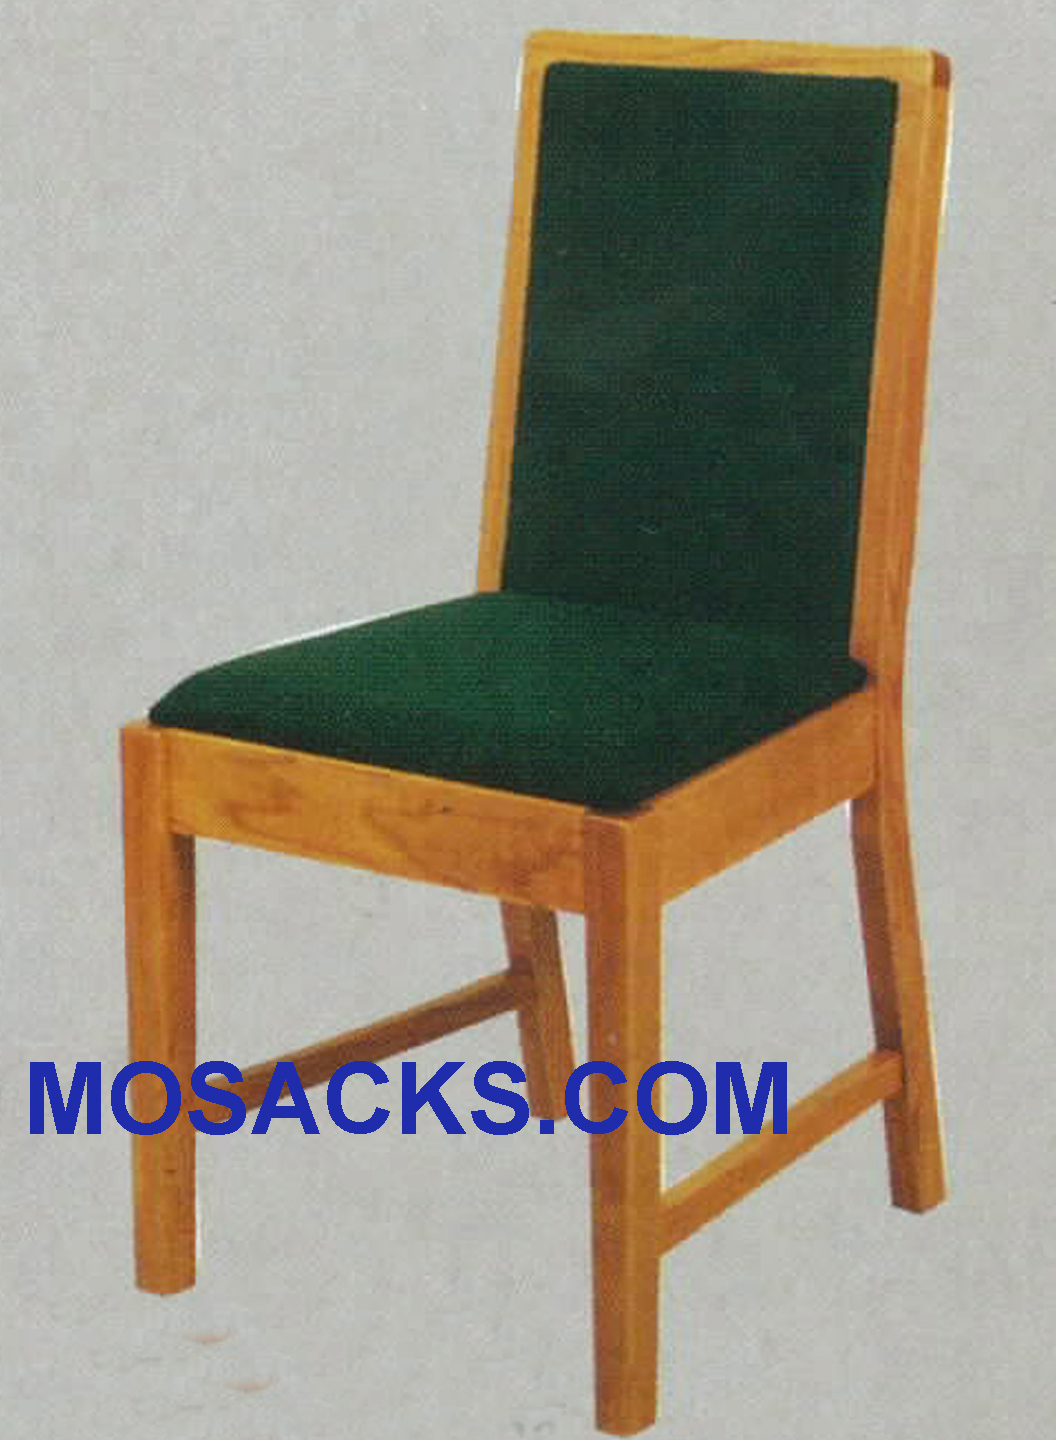 Side Chair 20" w x 18" d 35" h 40-170S